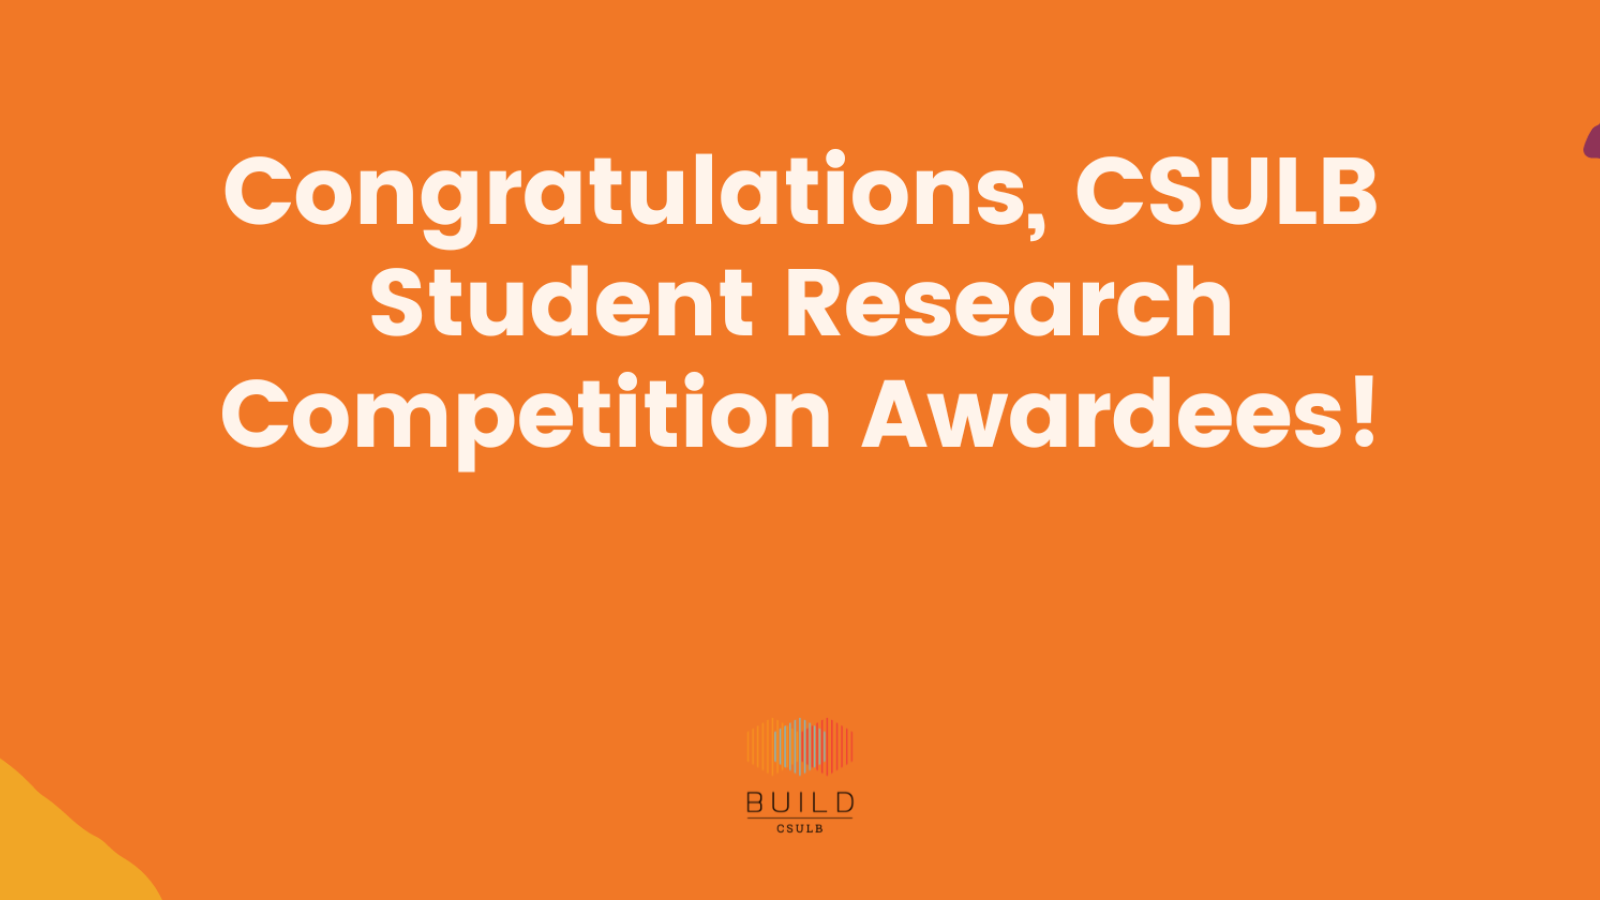 Congratulations, CSULB Student Research Competition Awardees! - Banner